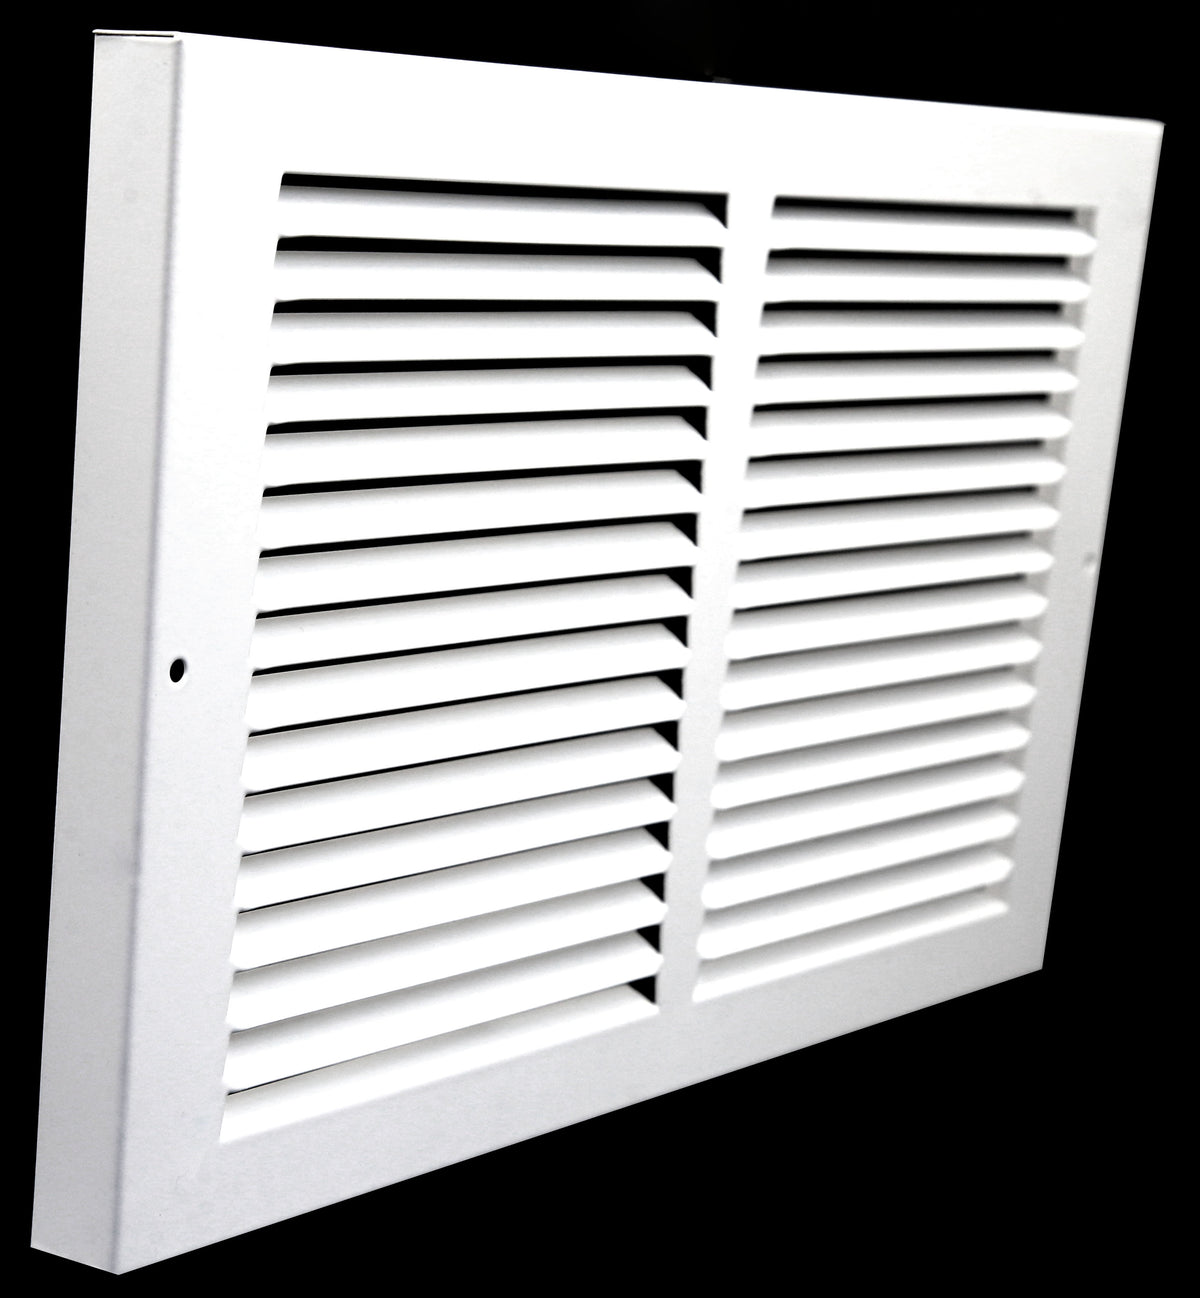 30&quot; X 8&quot; Baseboard Return Air Grille - HVAC Vent Duct Cover - 7/8&quot; Margin Turnback For Flush Fit With Baseboard Work - White